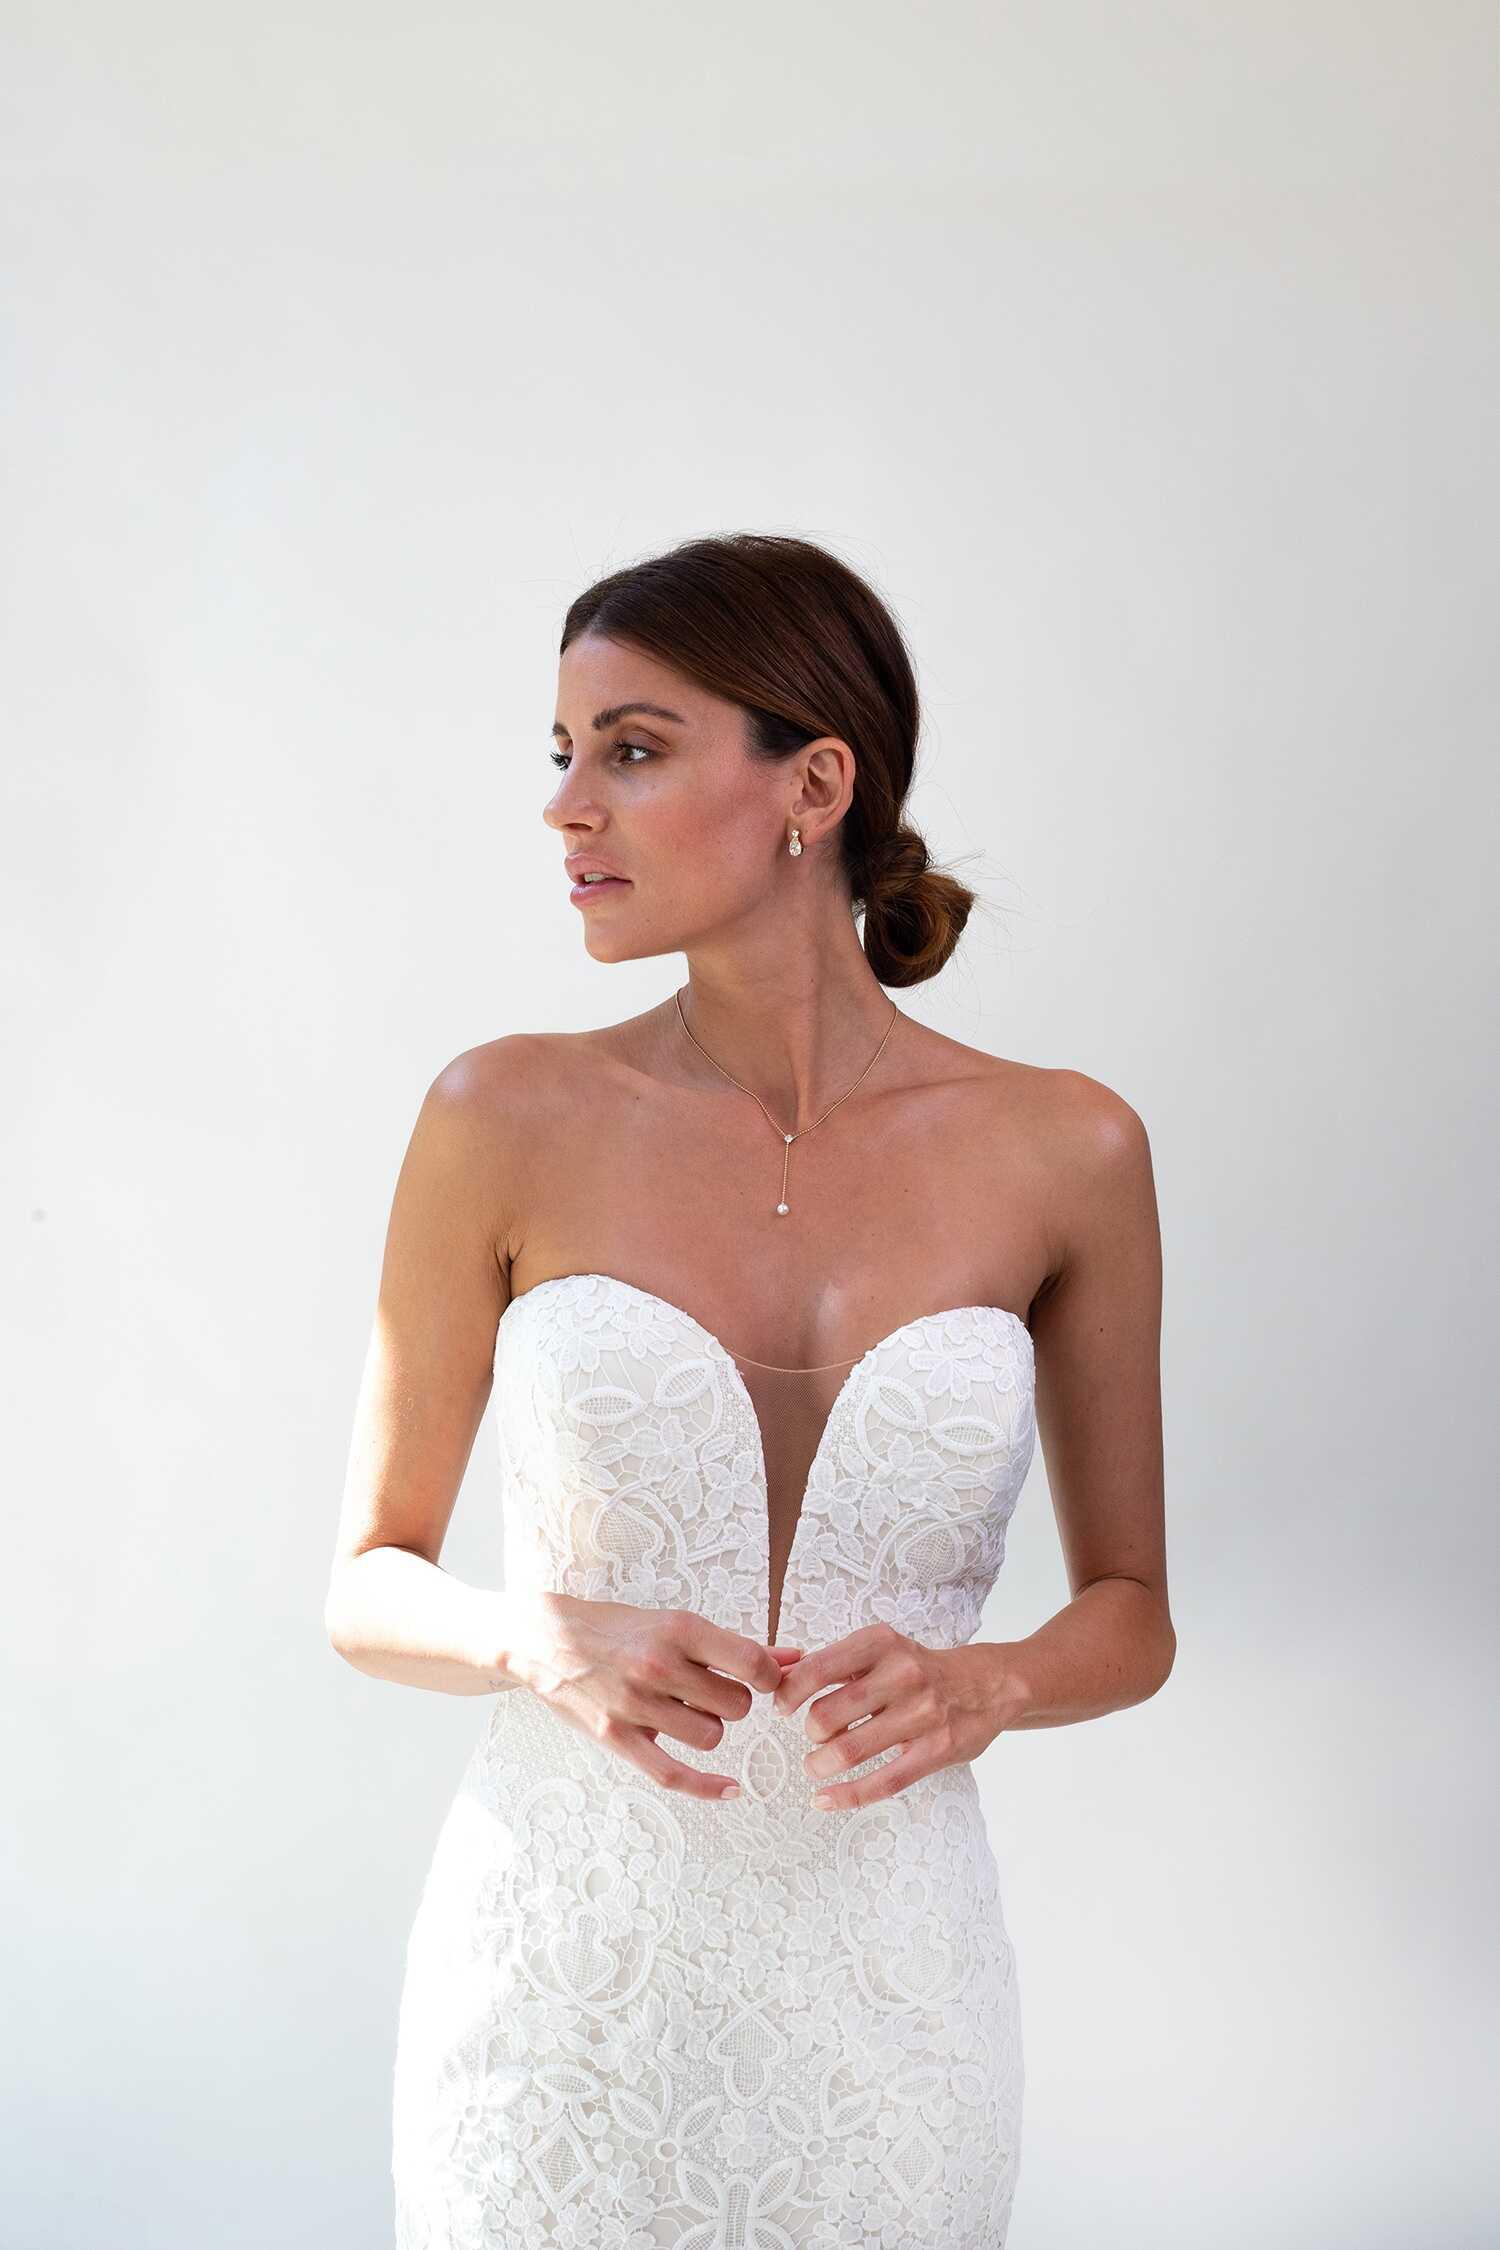 A guide to choosing bridal jewelry for every wedding dress